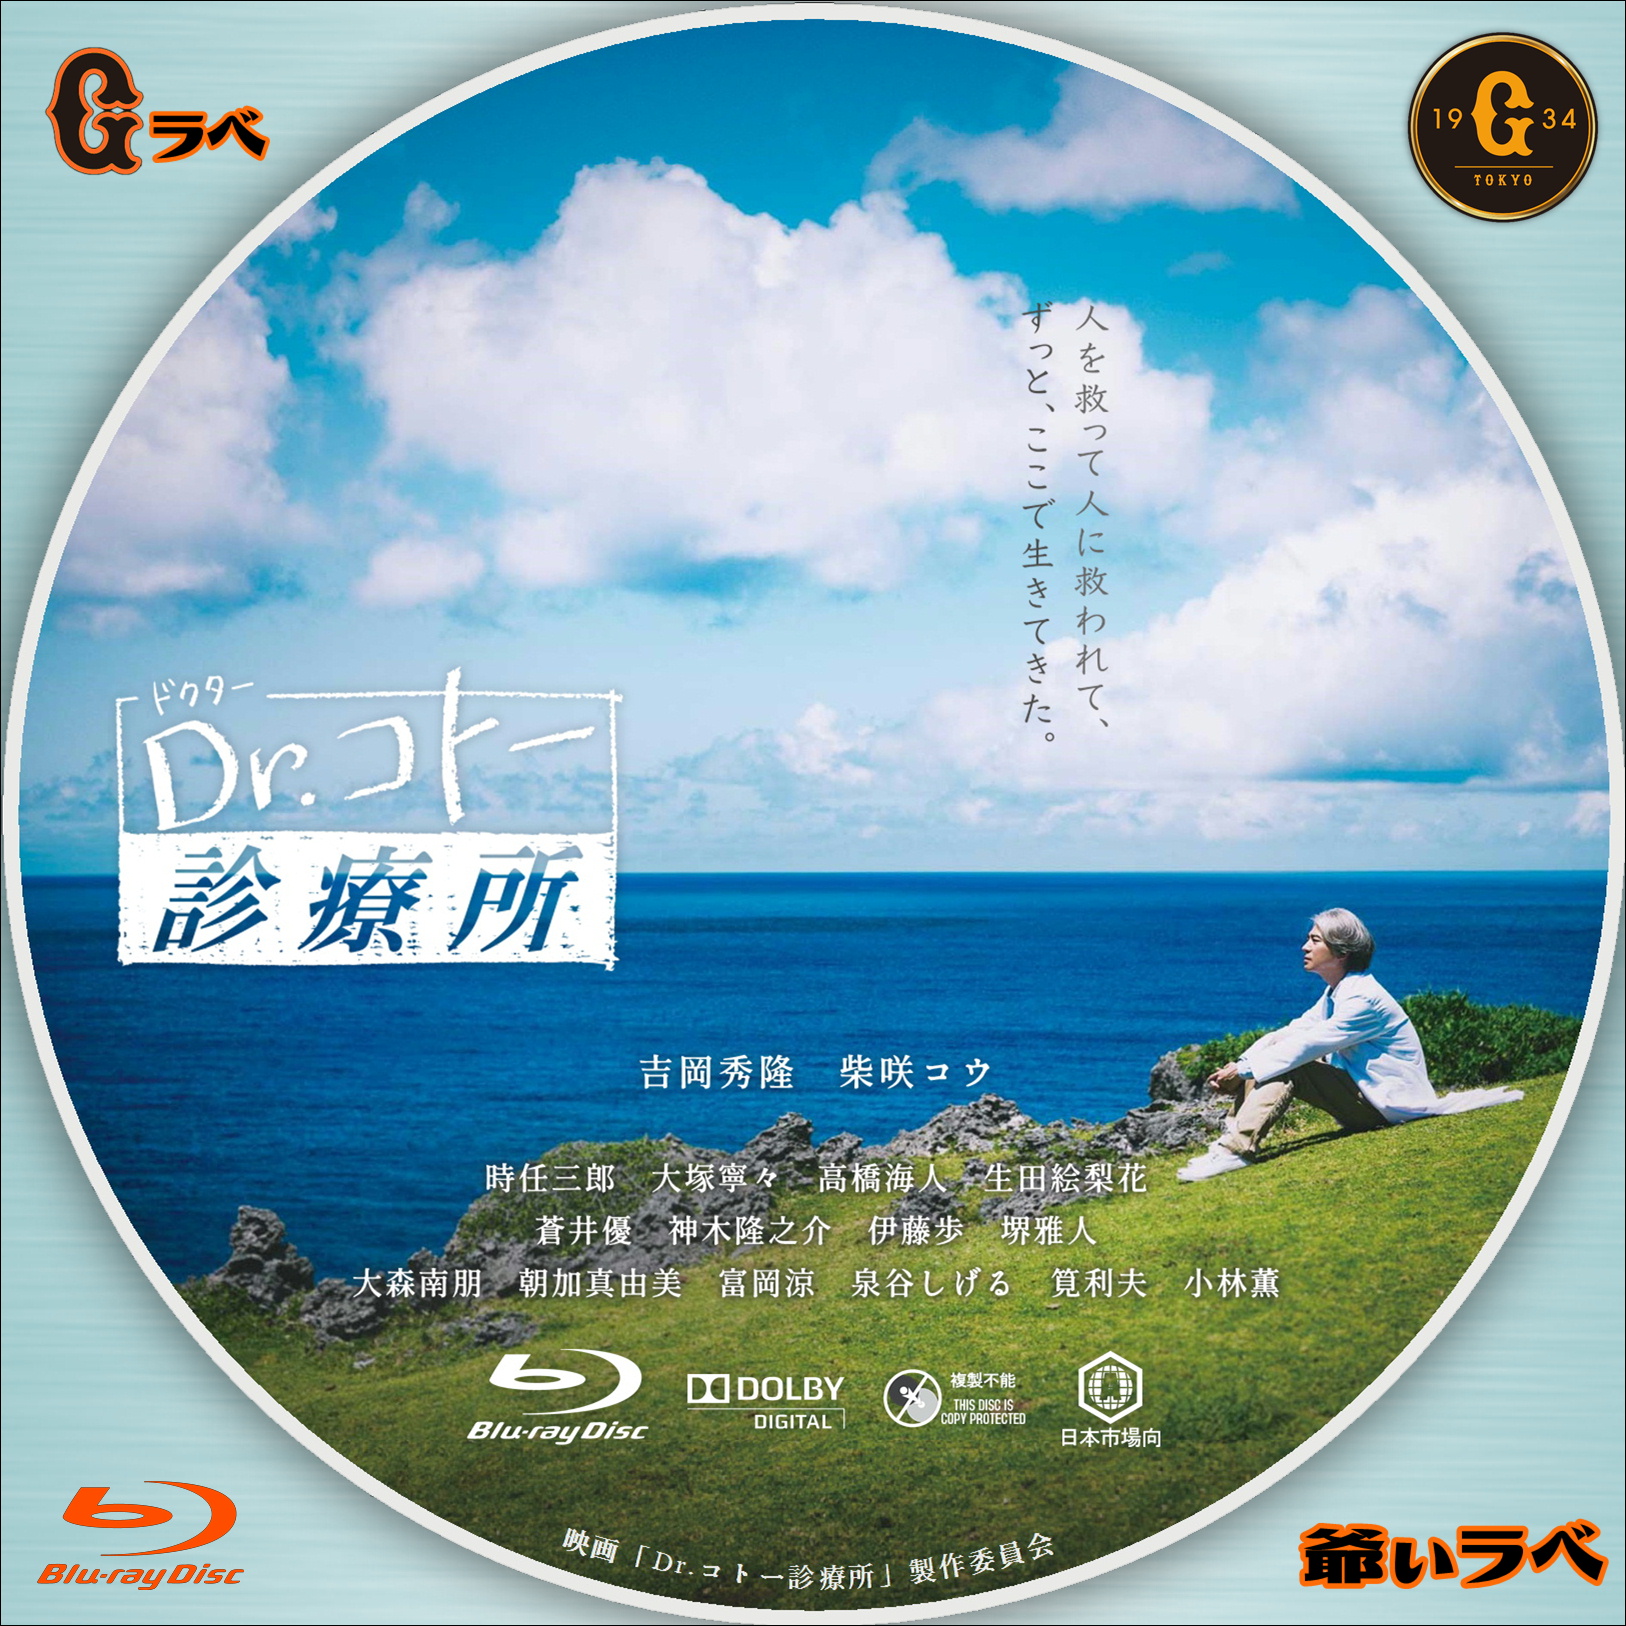 Dr-コトー診療所（Blu-ray）